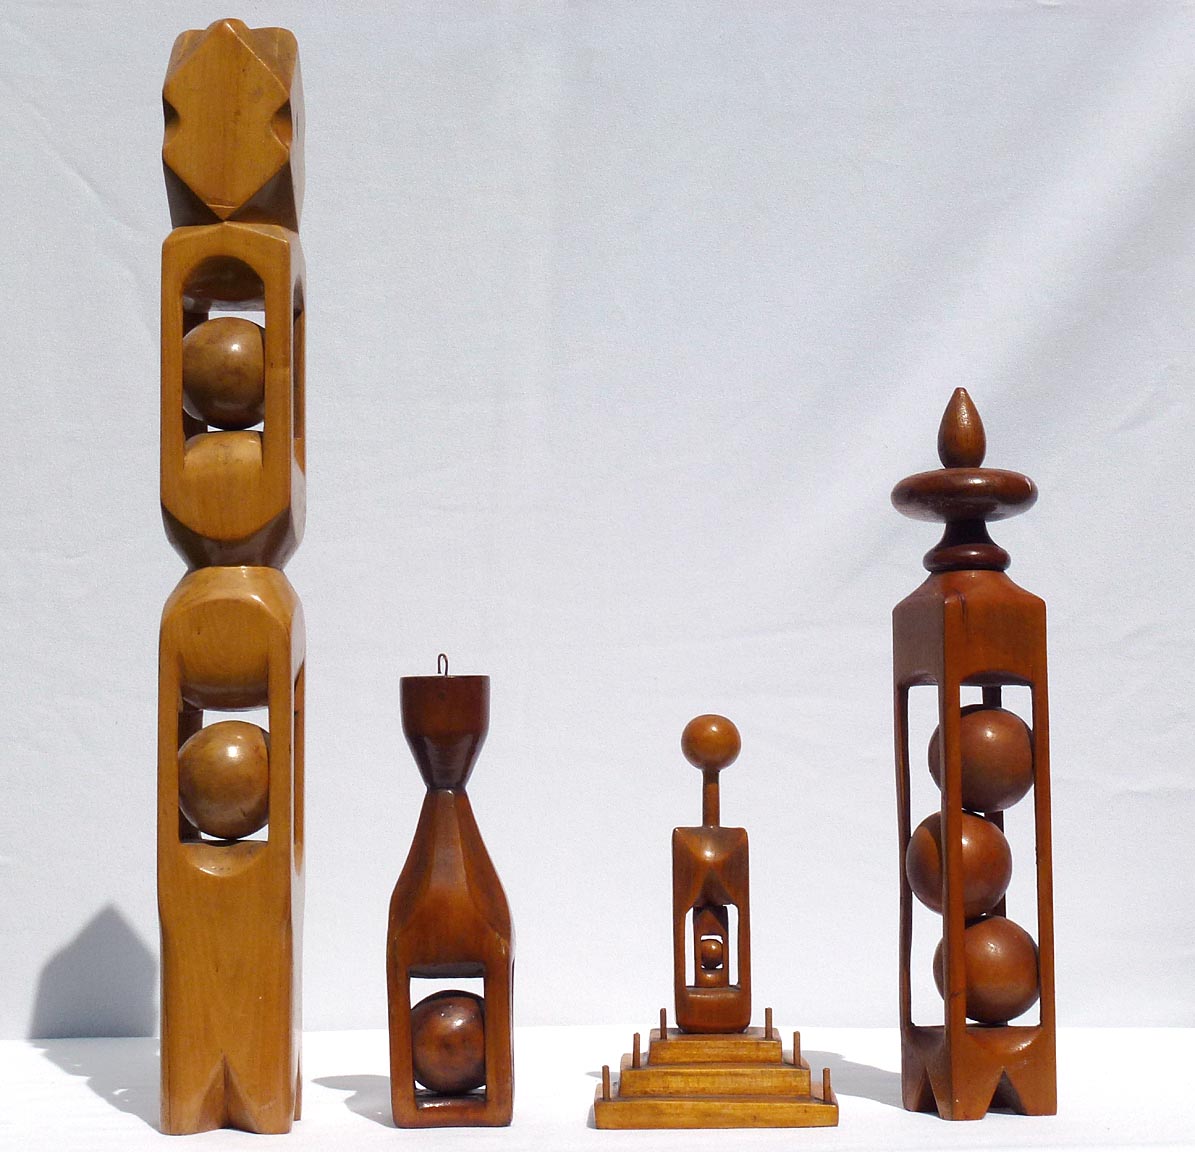 Four whimsy carvings by the same maker